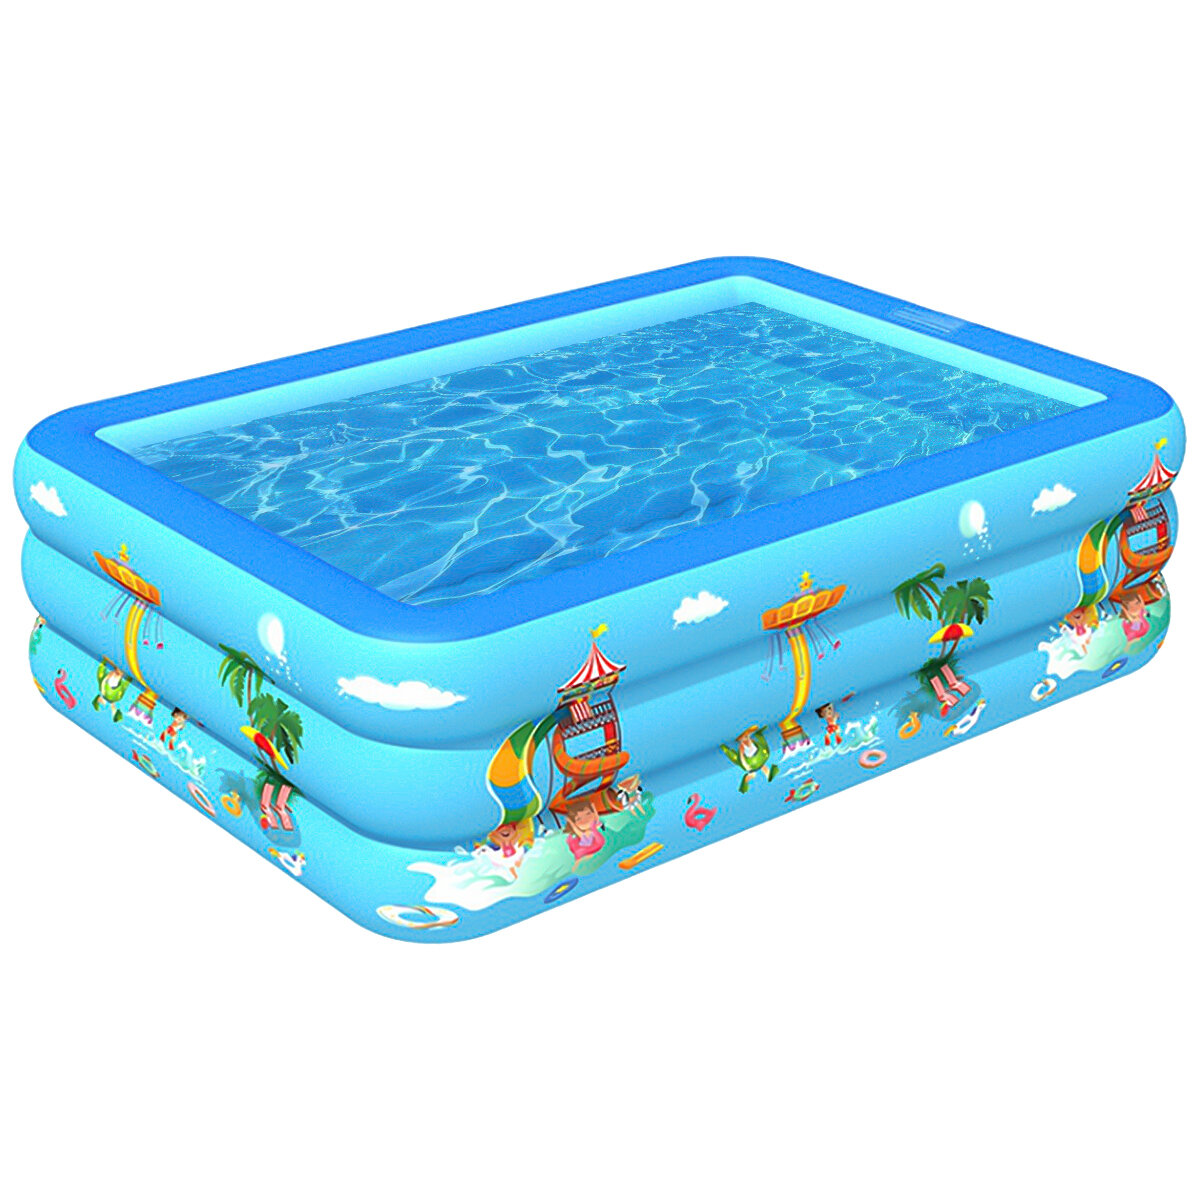 Image of Inflatable Swimming Pool Family Swimming Pool Children Pool Outdoor Water Play Kids Toys